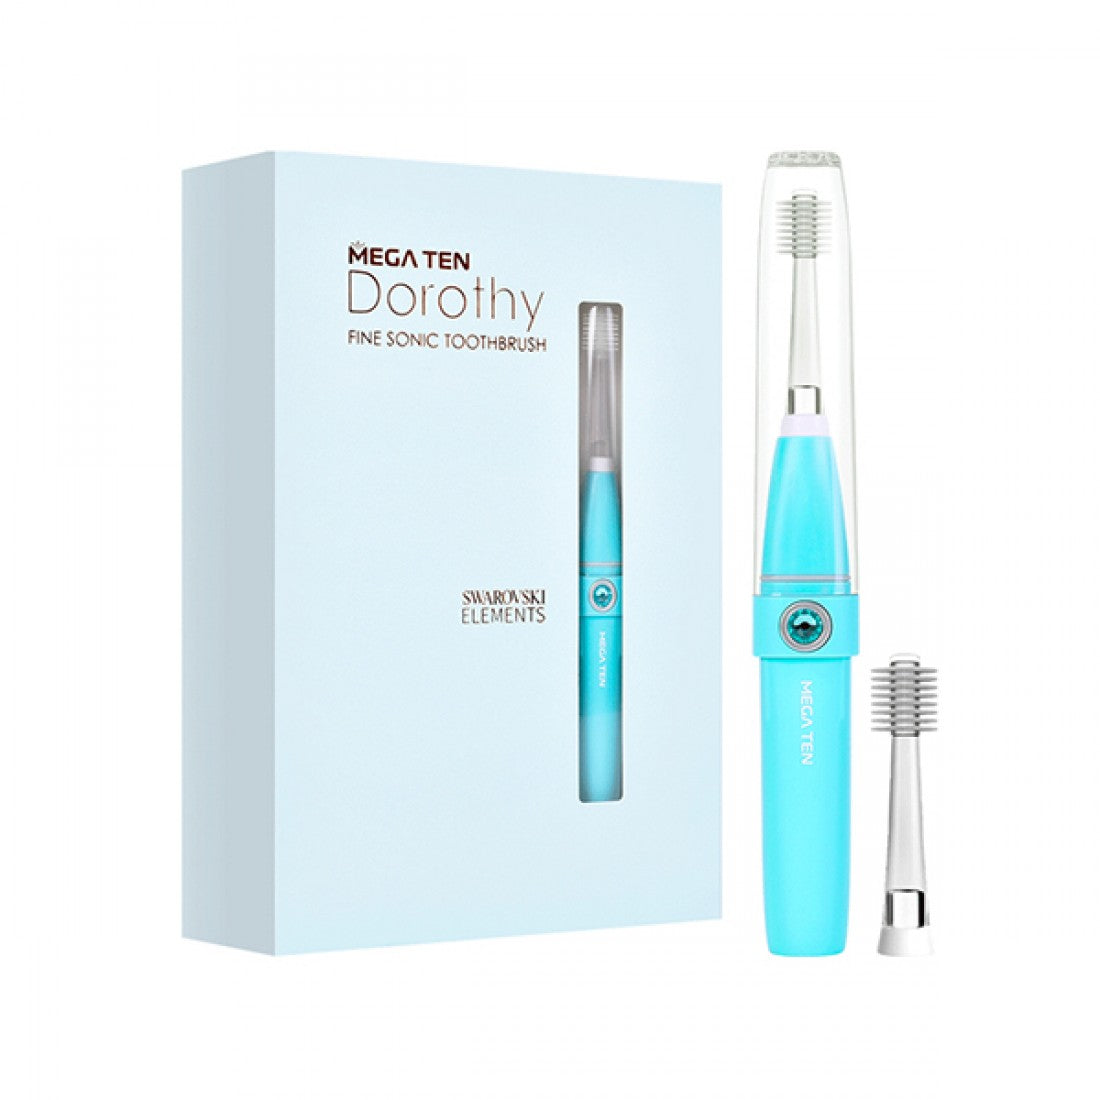 MEGA TEN Dorothy Fine Sonic Toothbrush Blue Set (Includes Body + 2 Replacement Brush Heads)